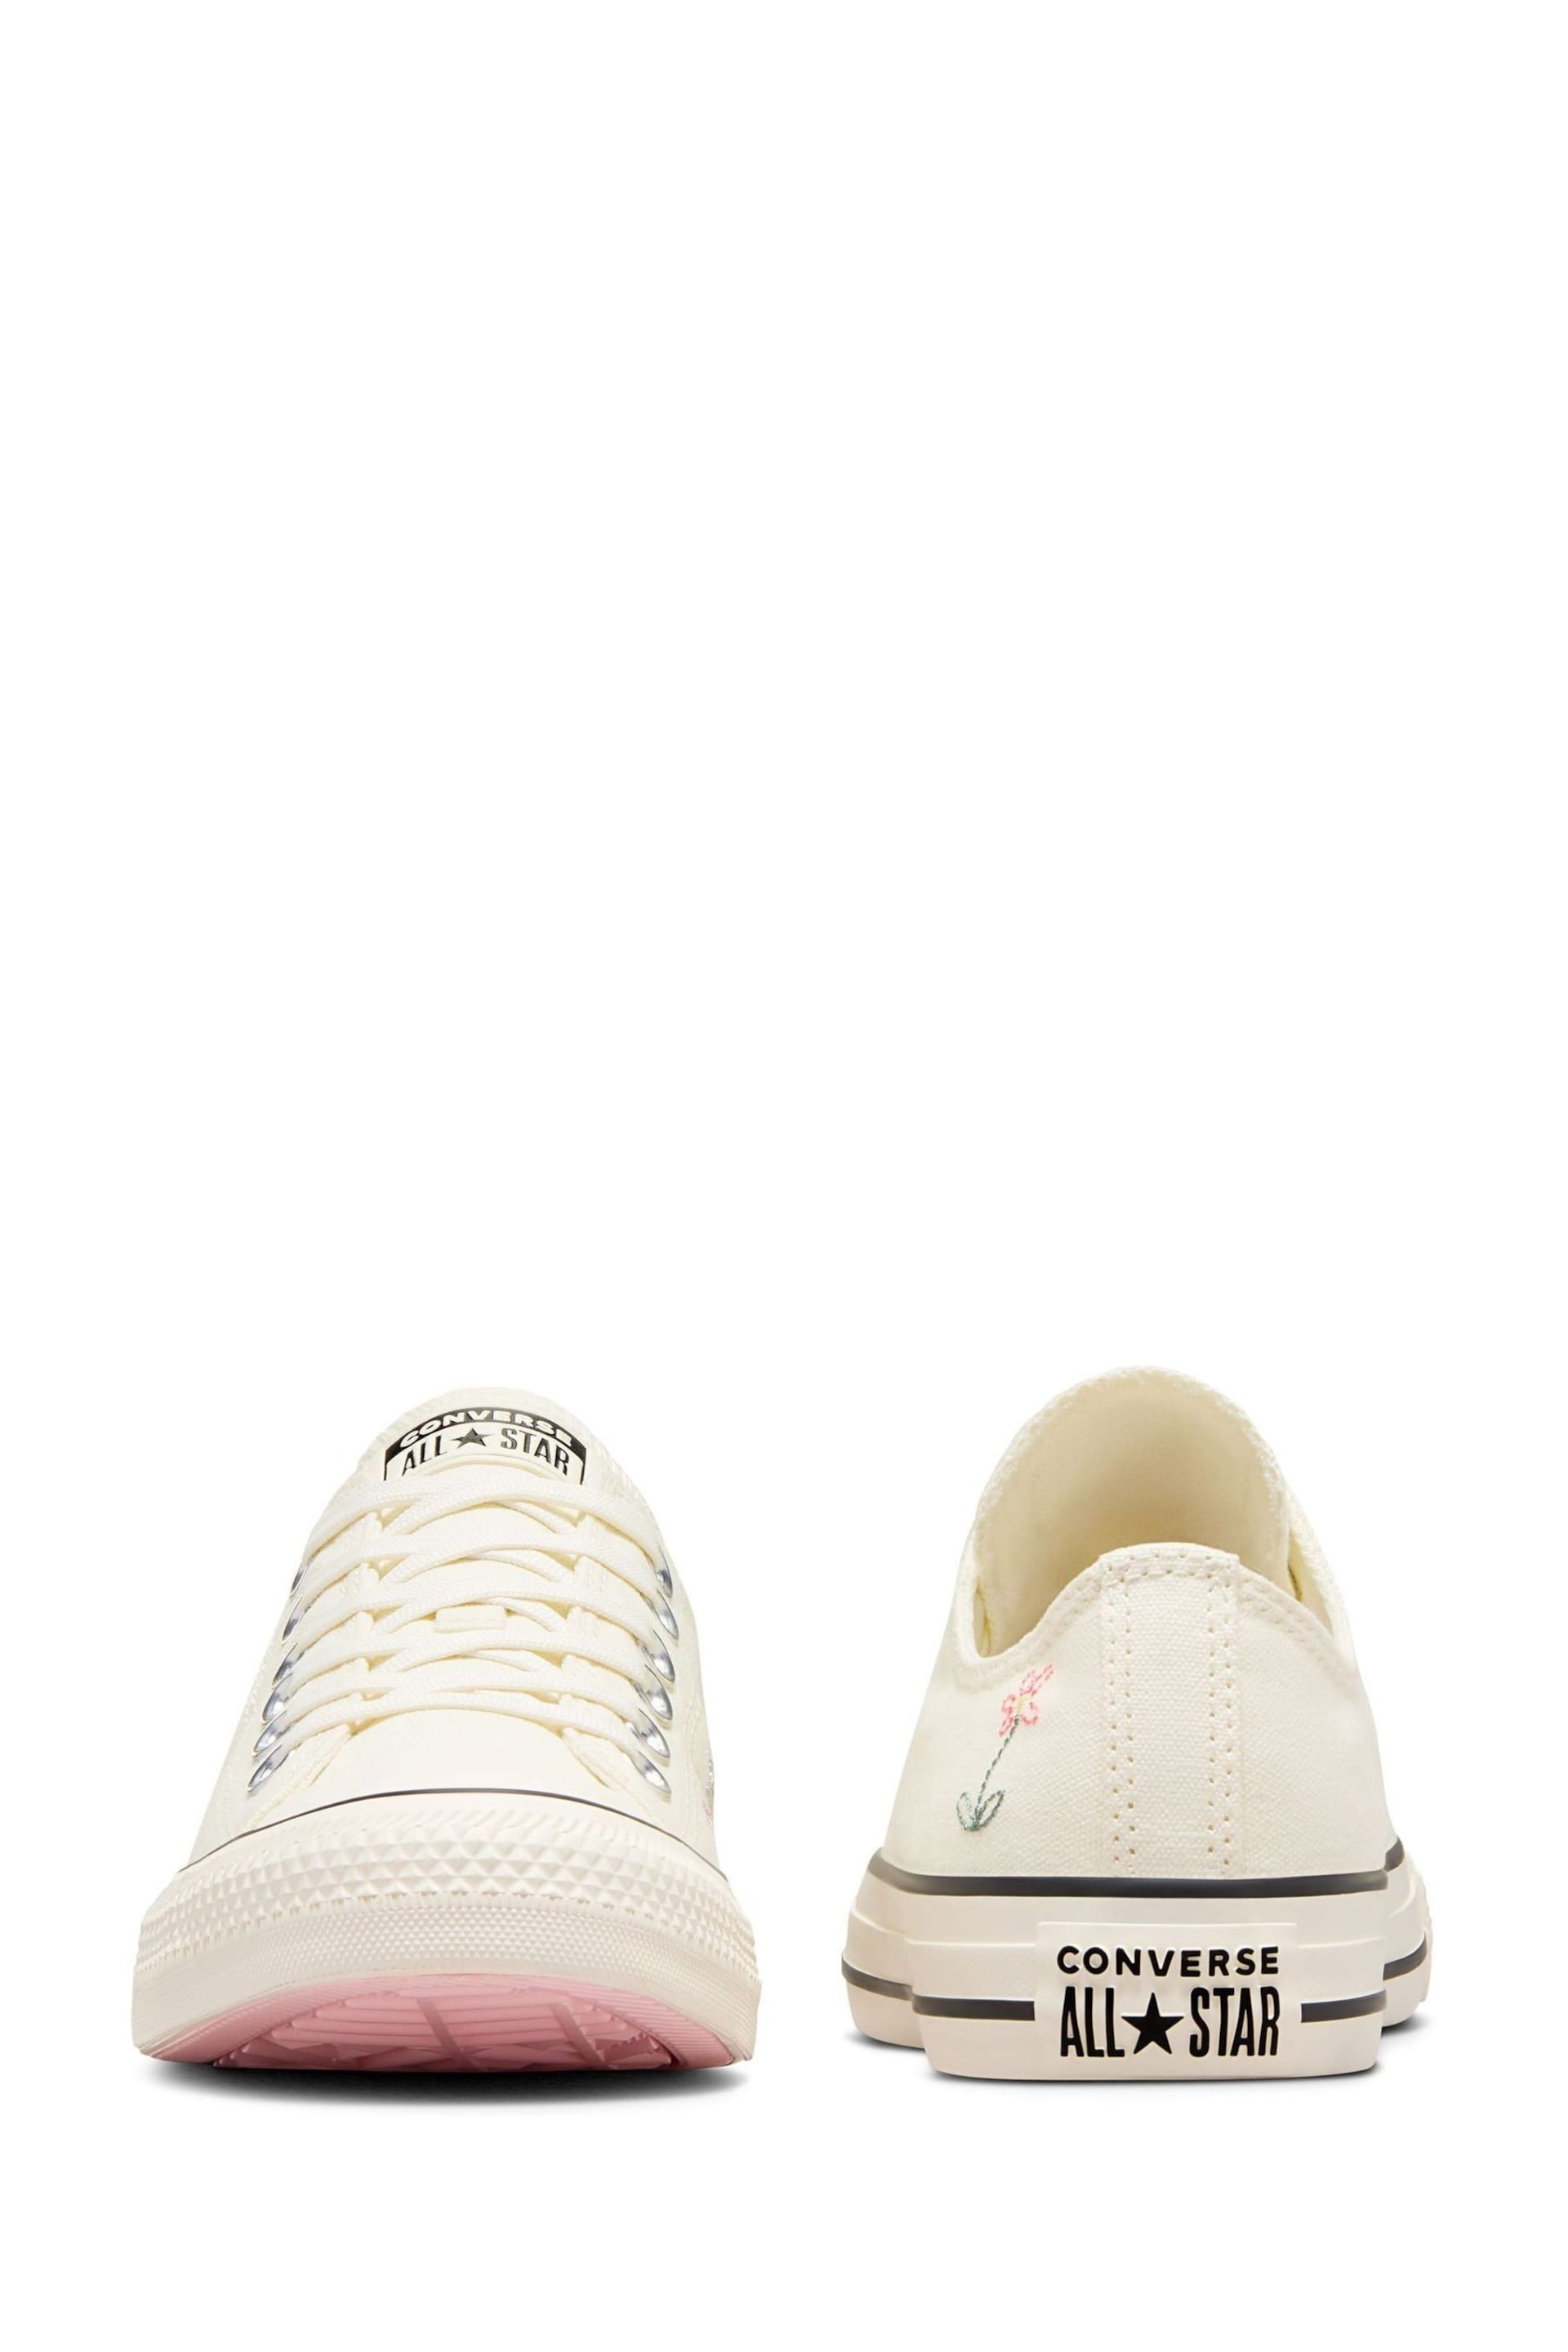 Converse Cream Chuck Taylor All Star Ox Trainers - Image 2 of 11